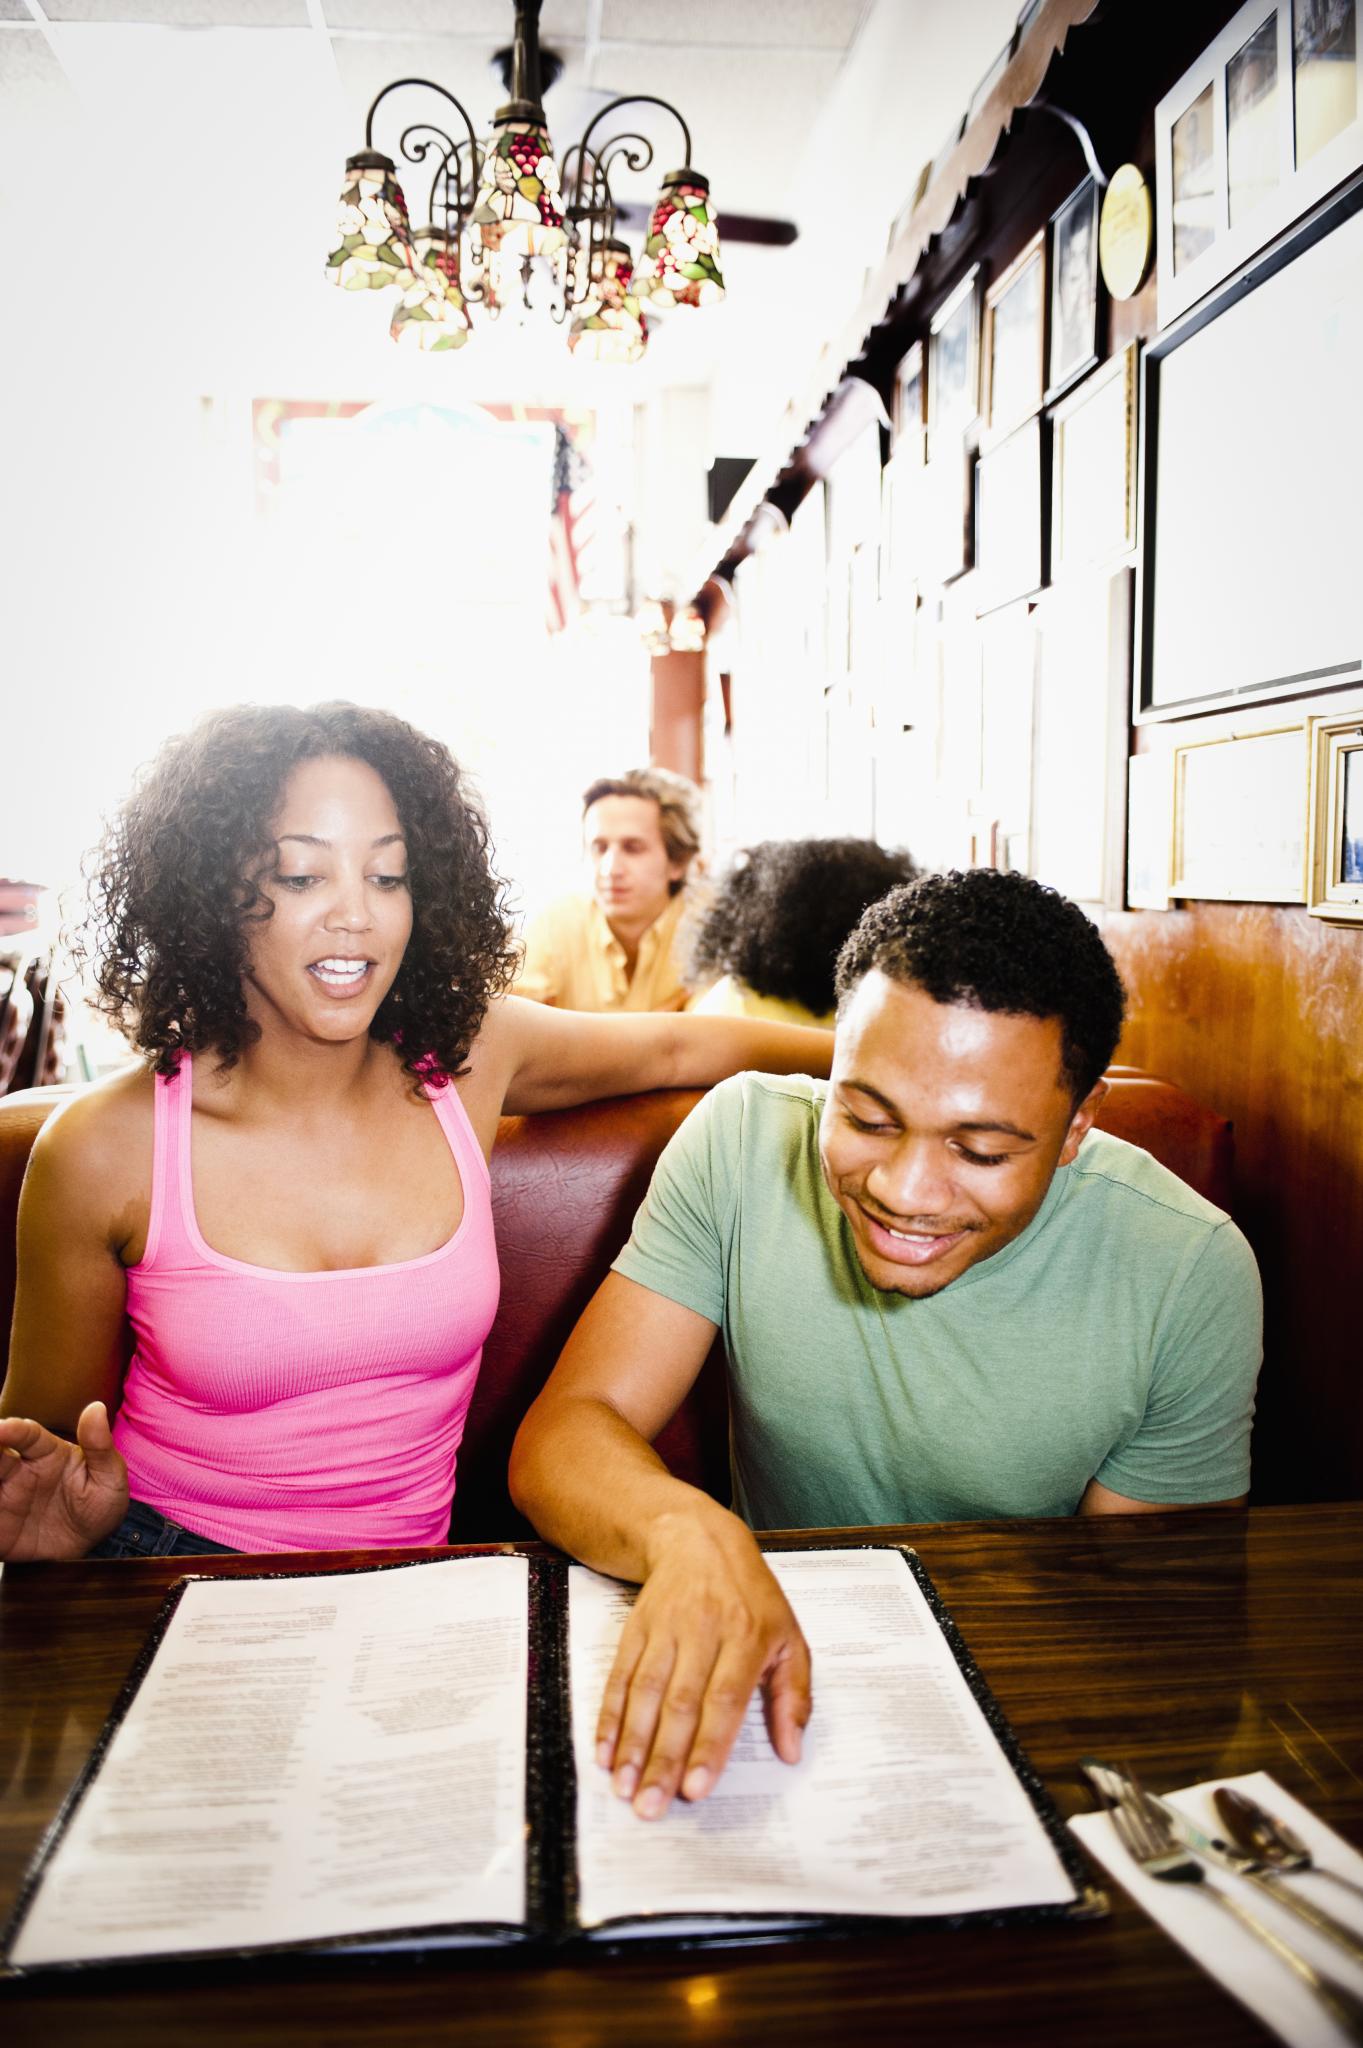 10 Ways to Choose Men More Wisely